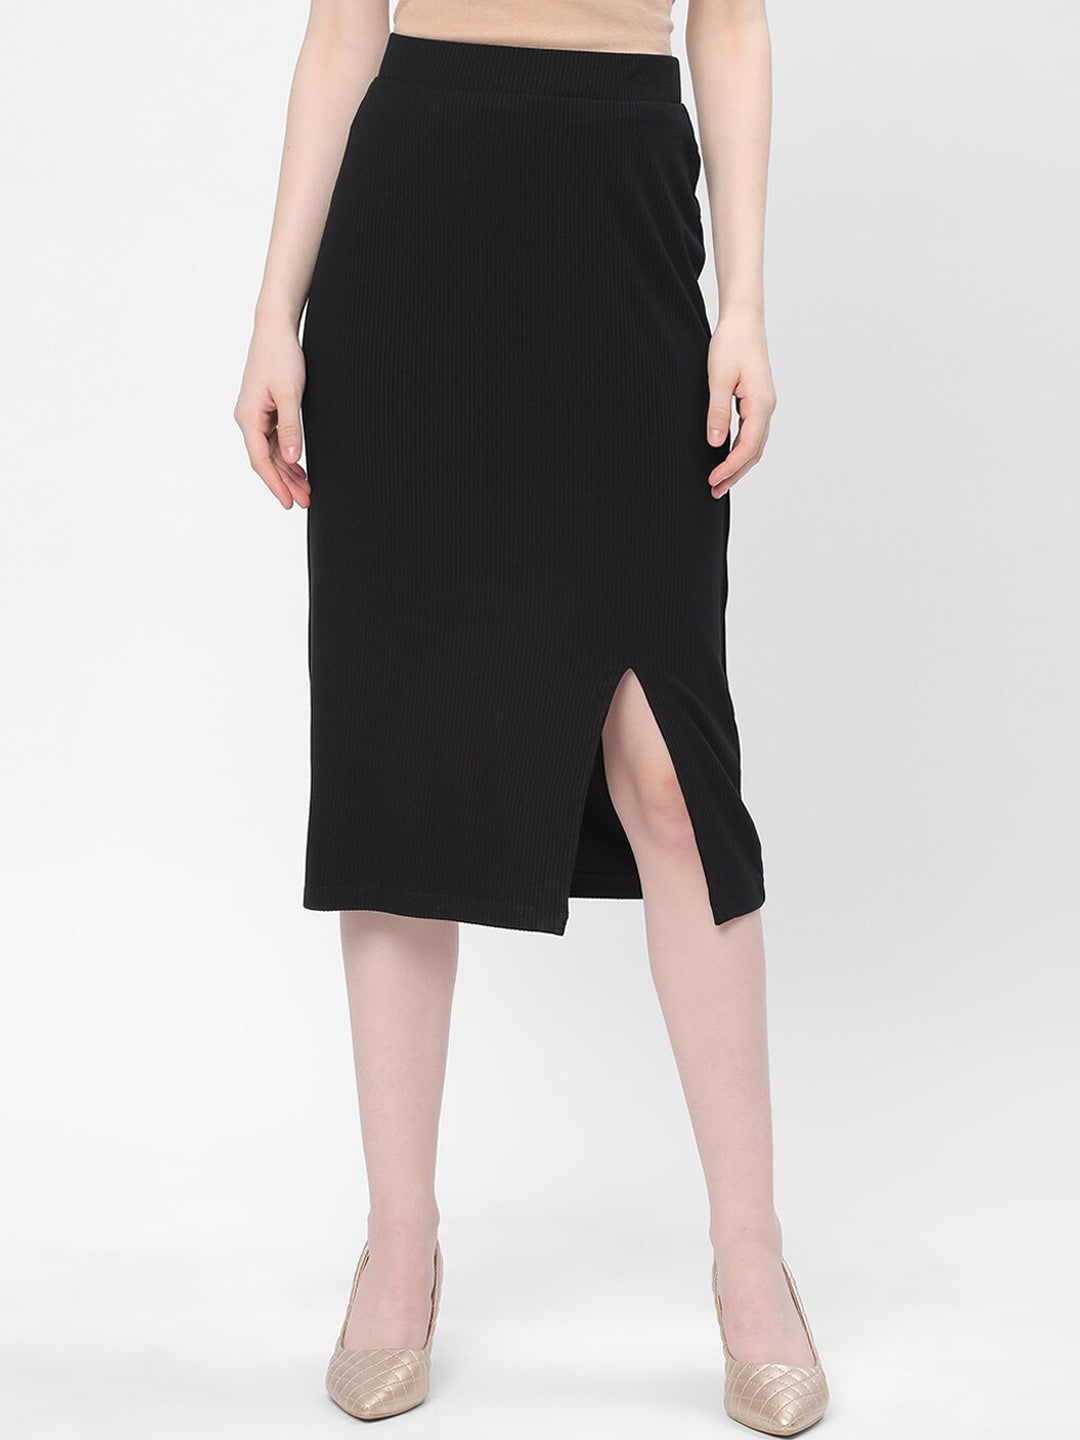 R&B Ribbed Knee Length Slit A-Line Skirt Price in India